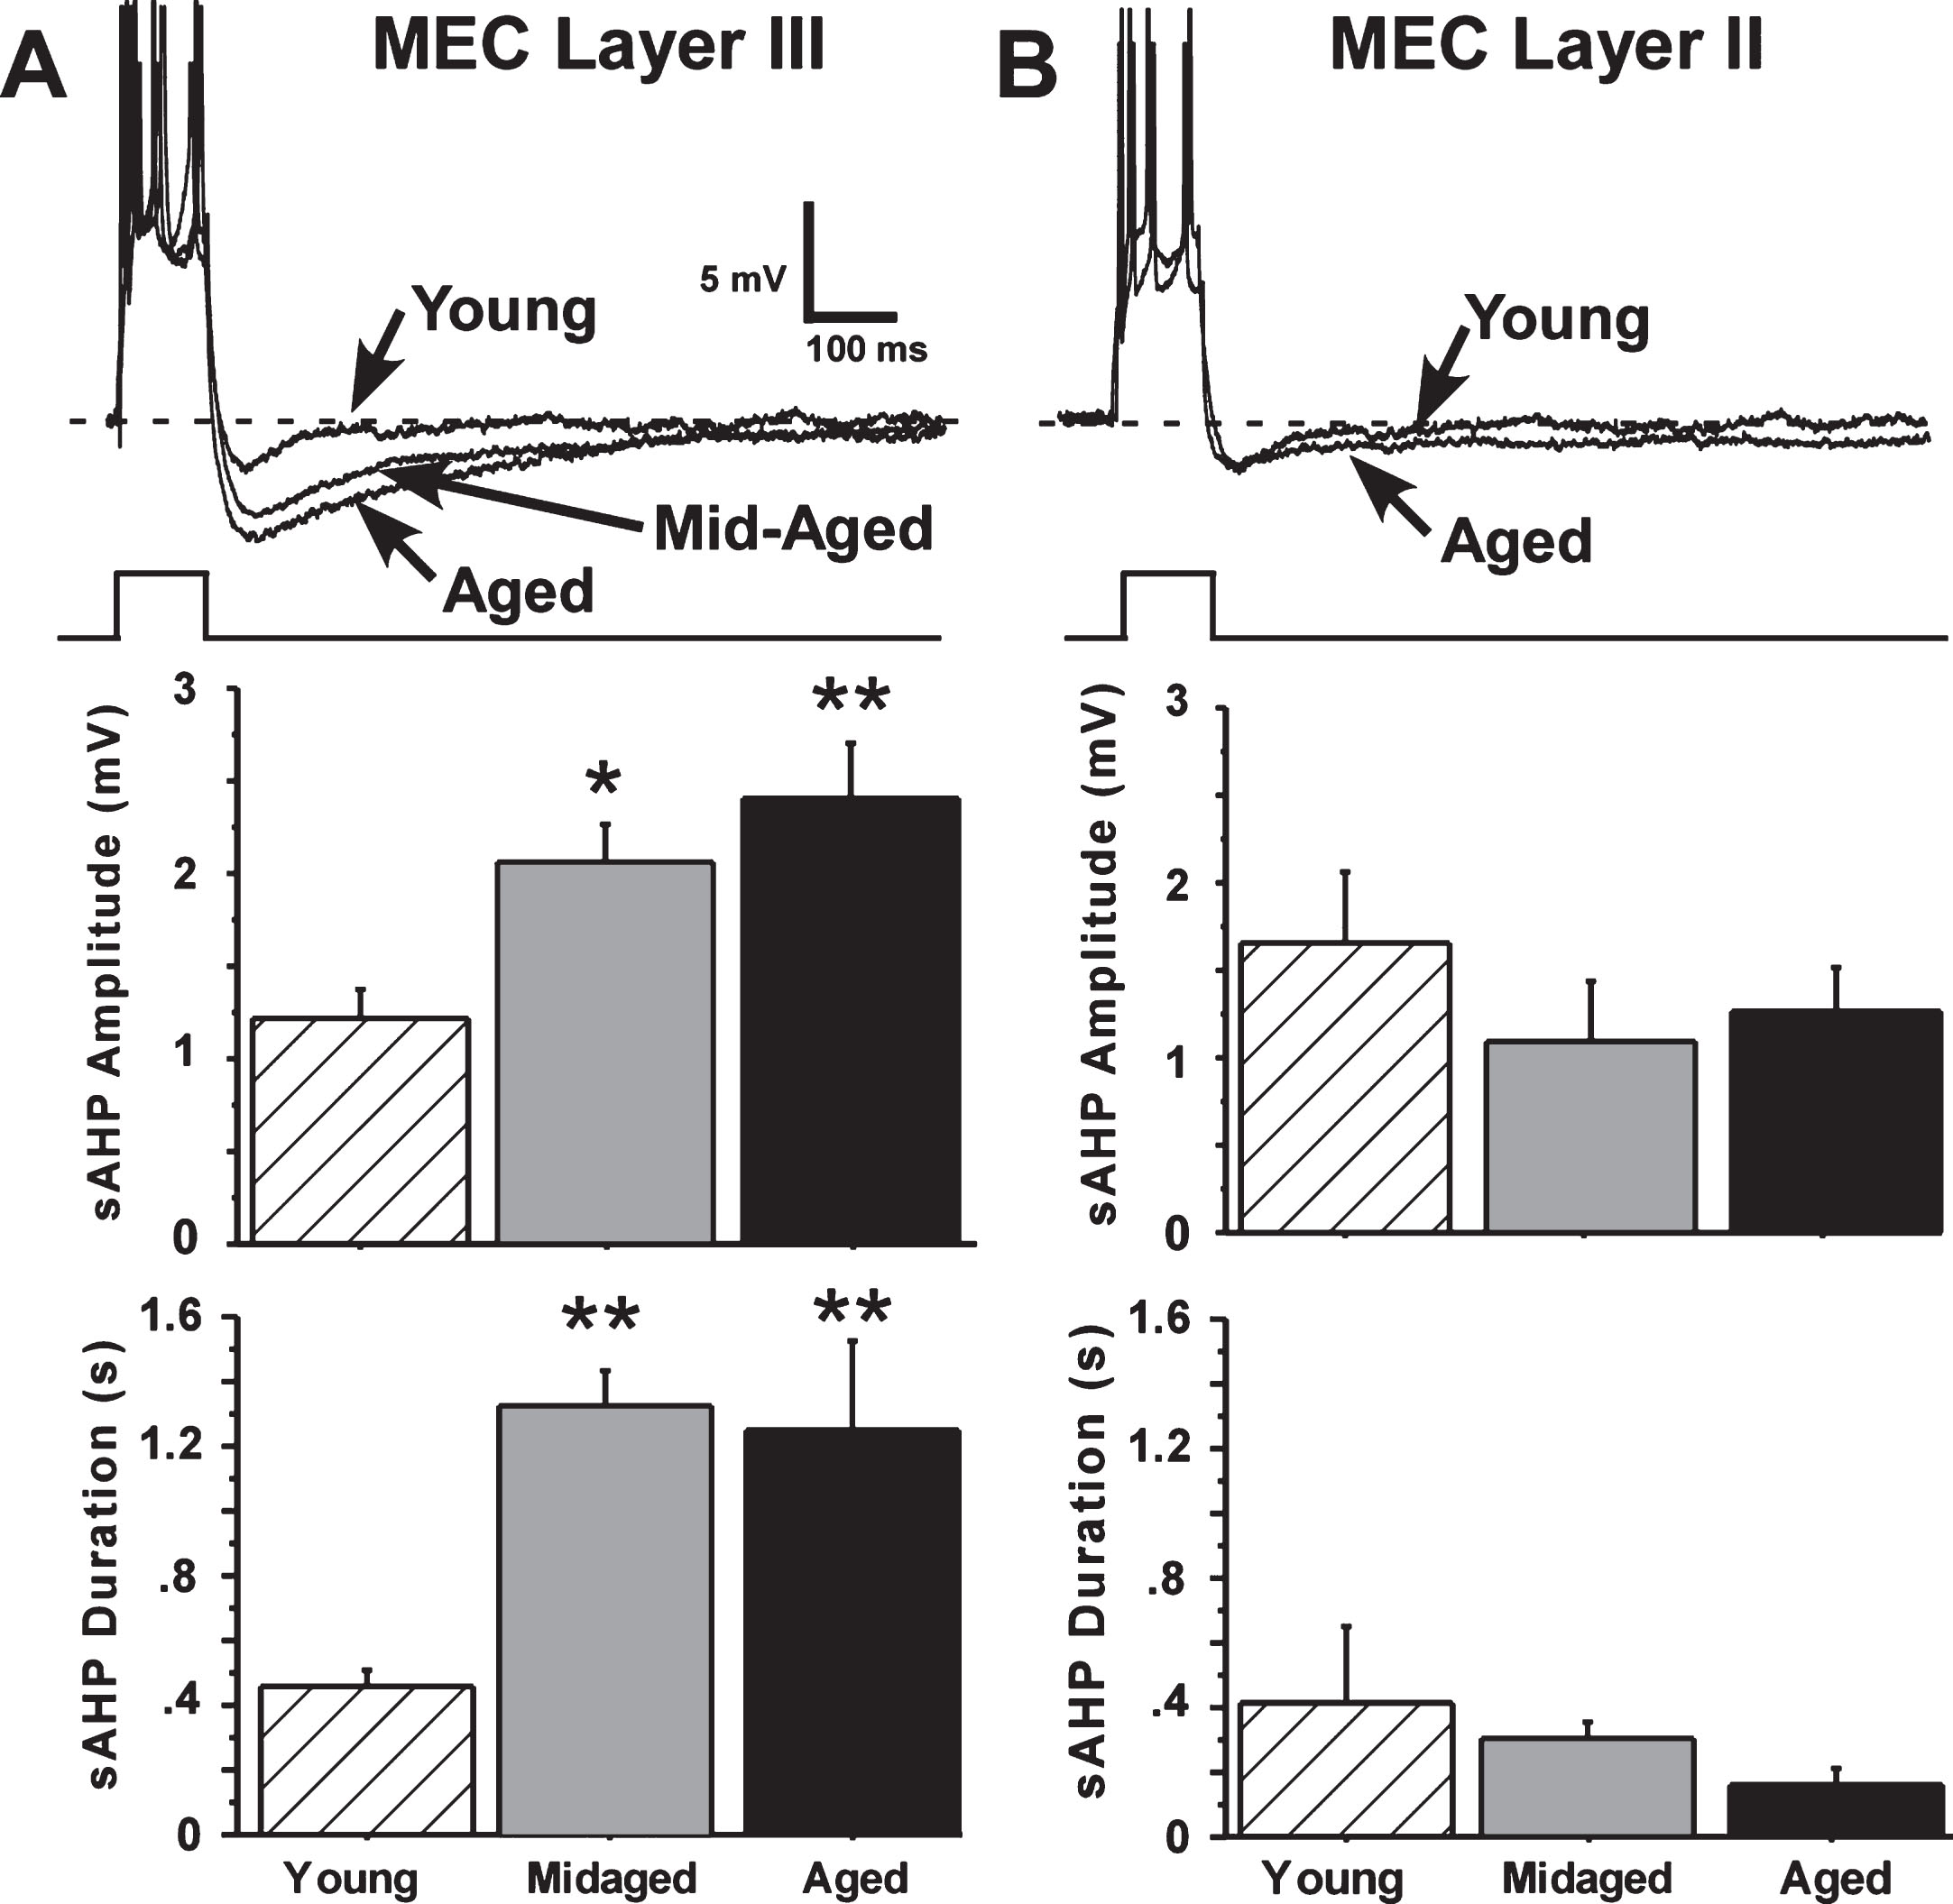 The slow afterhyperpolarization (sAHP) is altered by aging only in layer III. A) Representative examples and age-group means of sAHPs measured in layer III of the MEC. Significant age differences in slow AHP amplitude and duration were found for layer III neurons, with sAHPs in aged (21 months old) and mid-aged (10 months old) animals increased compared to sAHPs in young (4 months old) rats. B) Representative examples and age-group means of sAHPs measured in layer II of the MEC. No aging differences were observed in layer II neurons. (Means ± S.E.M. for group values; *p < 0.01; **p < 0.001 ANOVA pLSD significant pairwise contrast versus young).